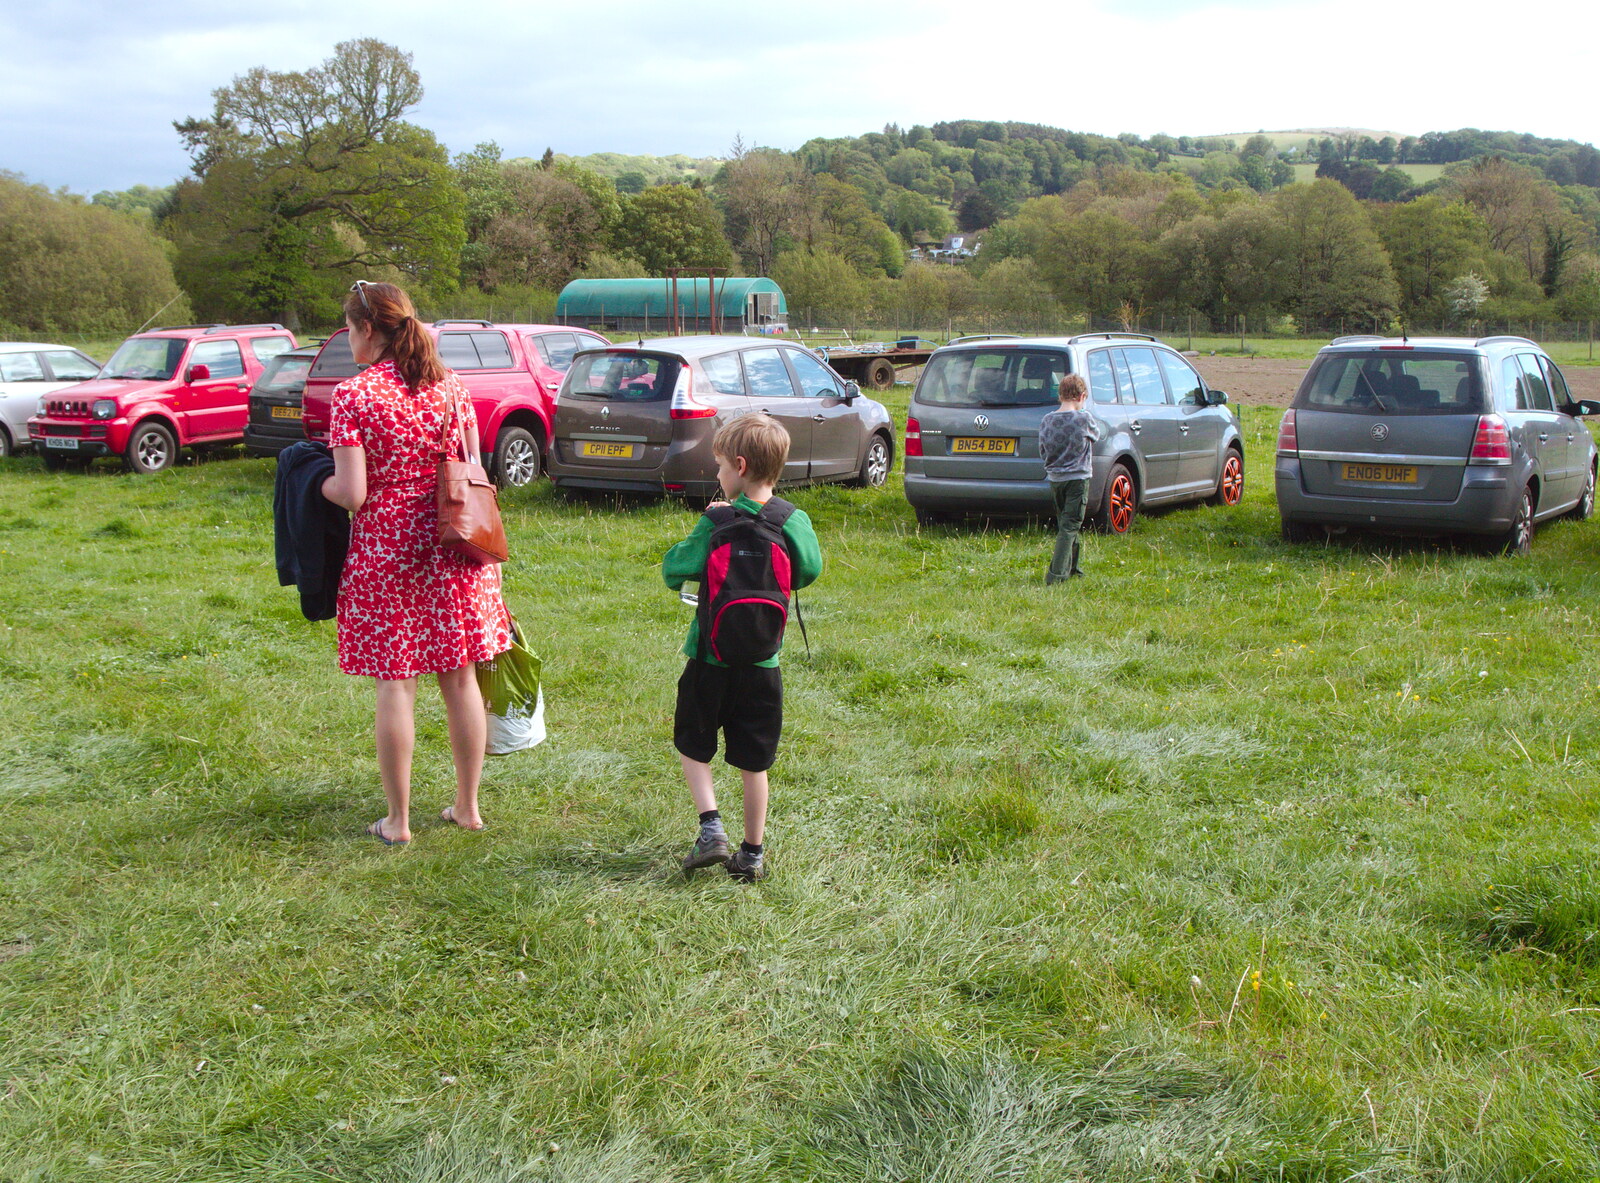 Isobel, Harry and Fred in the grassy car park from Chagford Lido and a Trip to Parke, Bovey Tracey, Devon - 25th May 2019